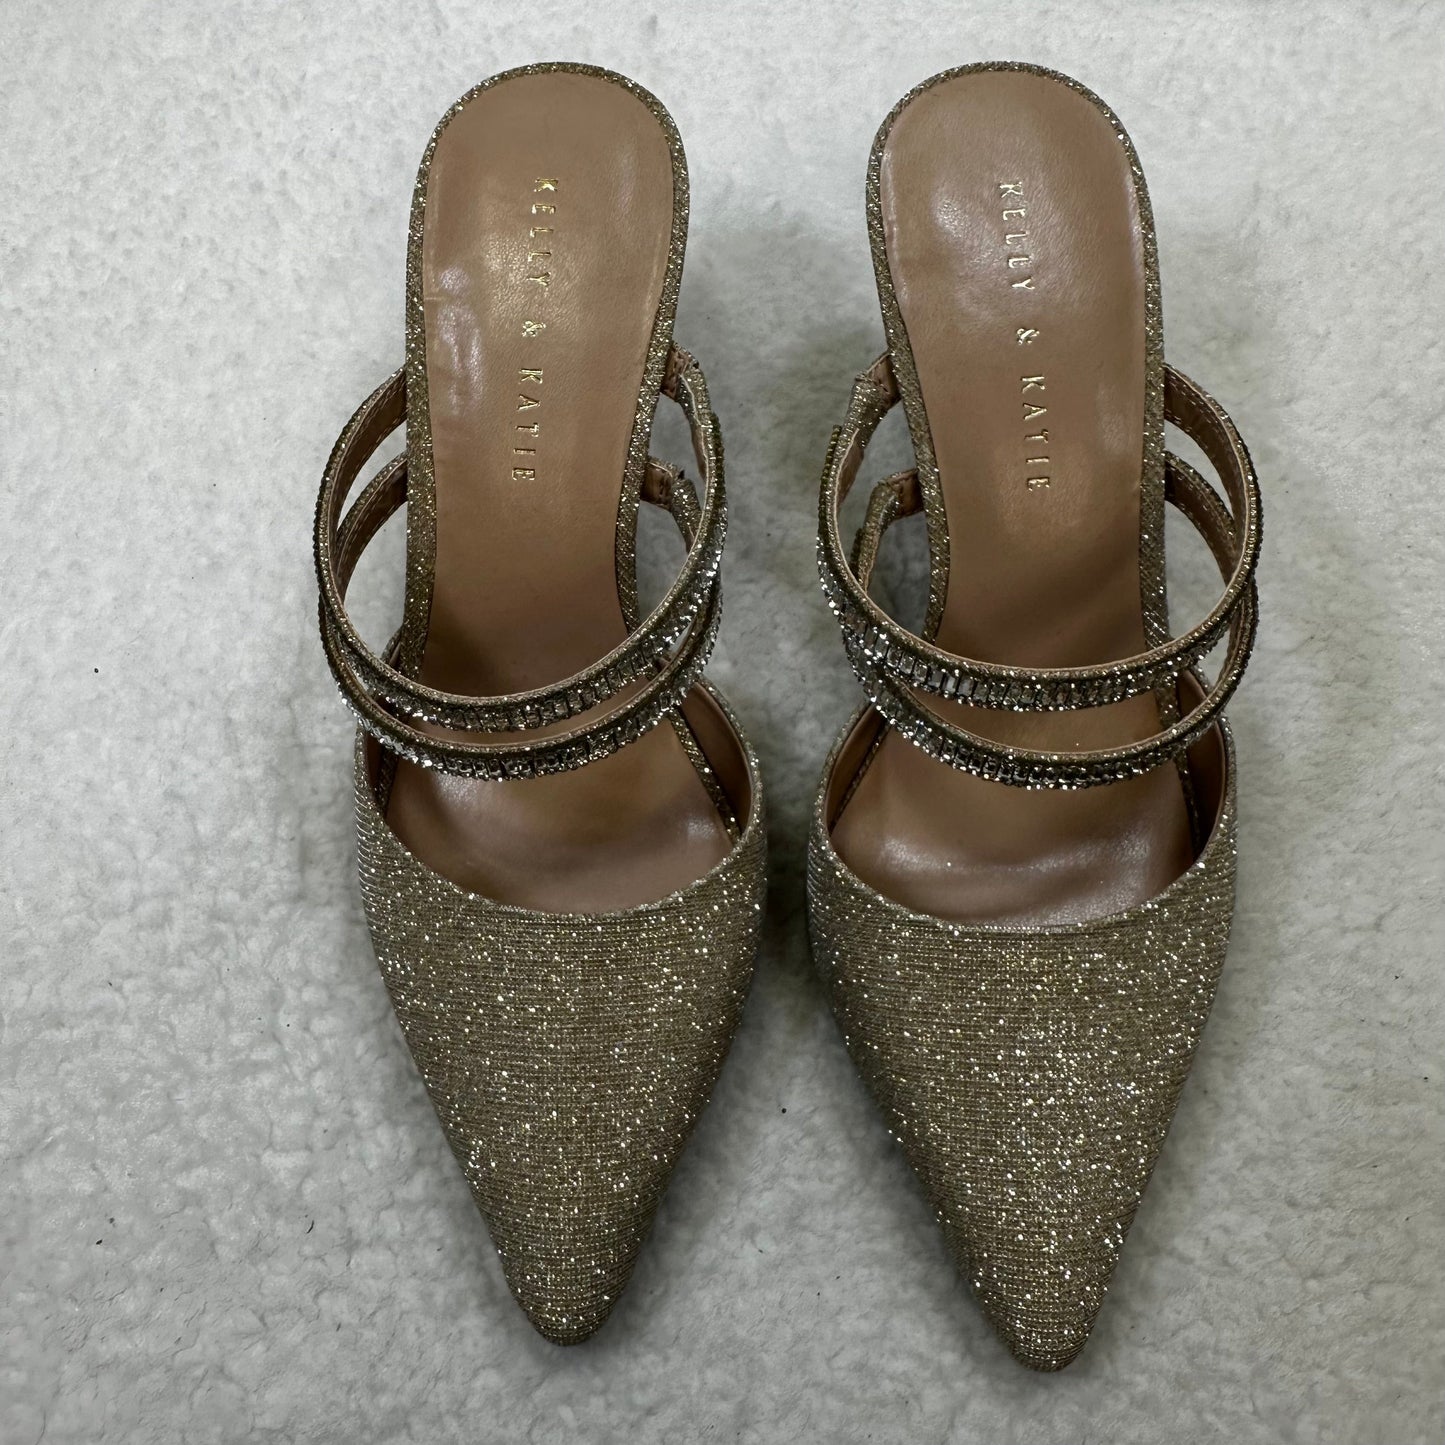 Sparkles Shoes Heels Stiletto Kelly And Katie, Size 9